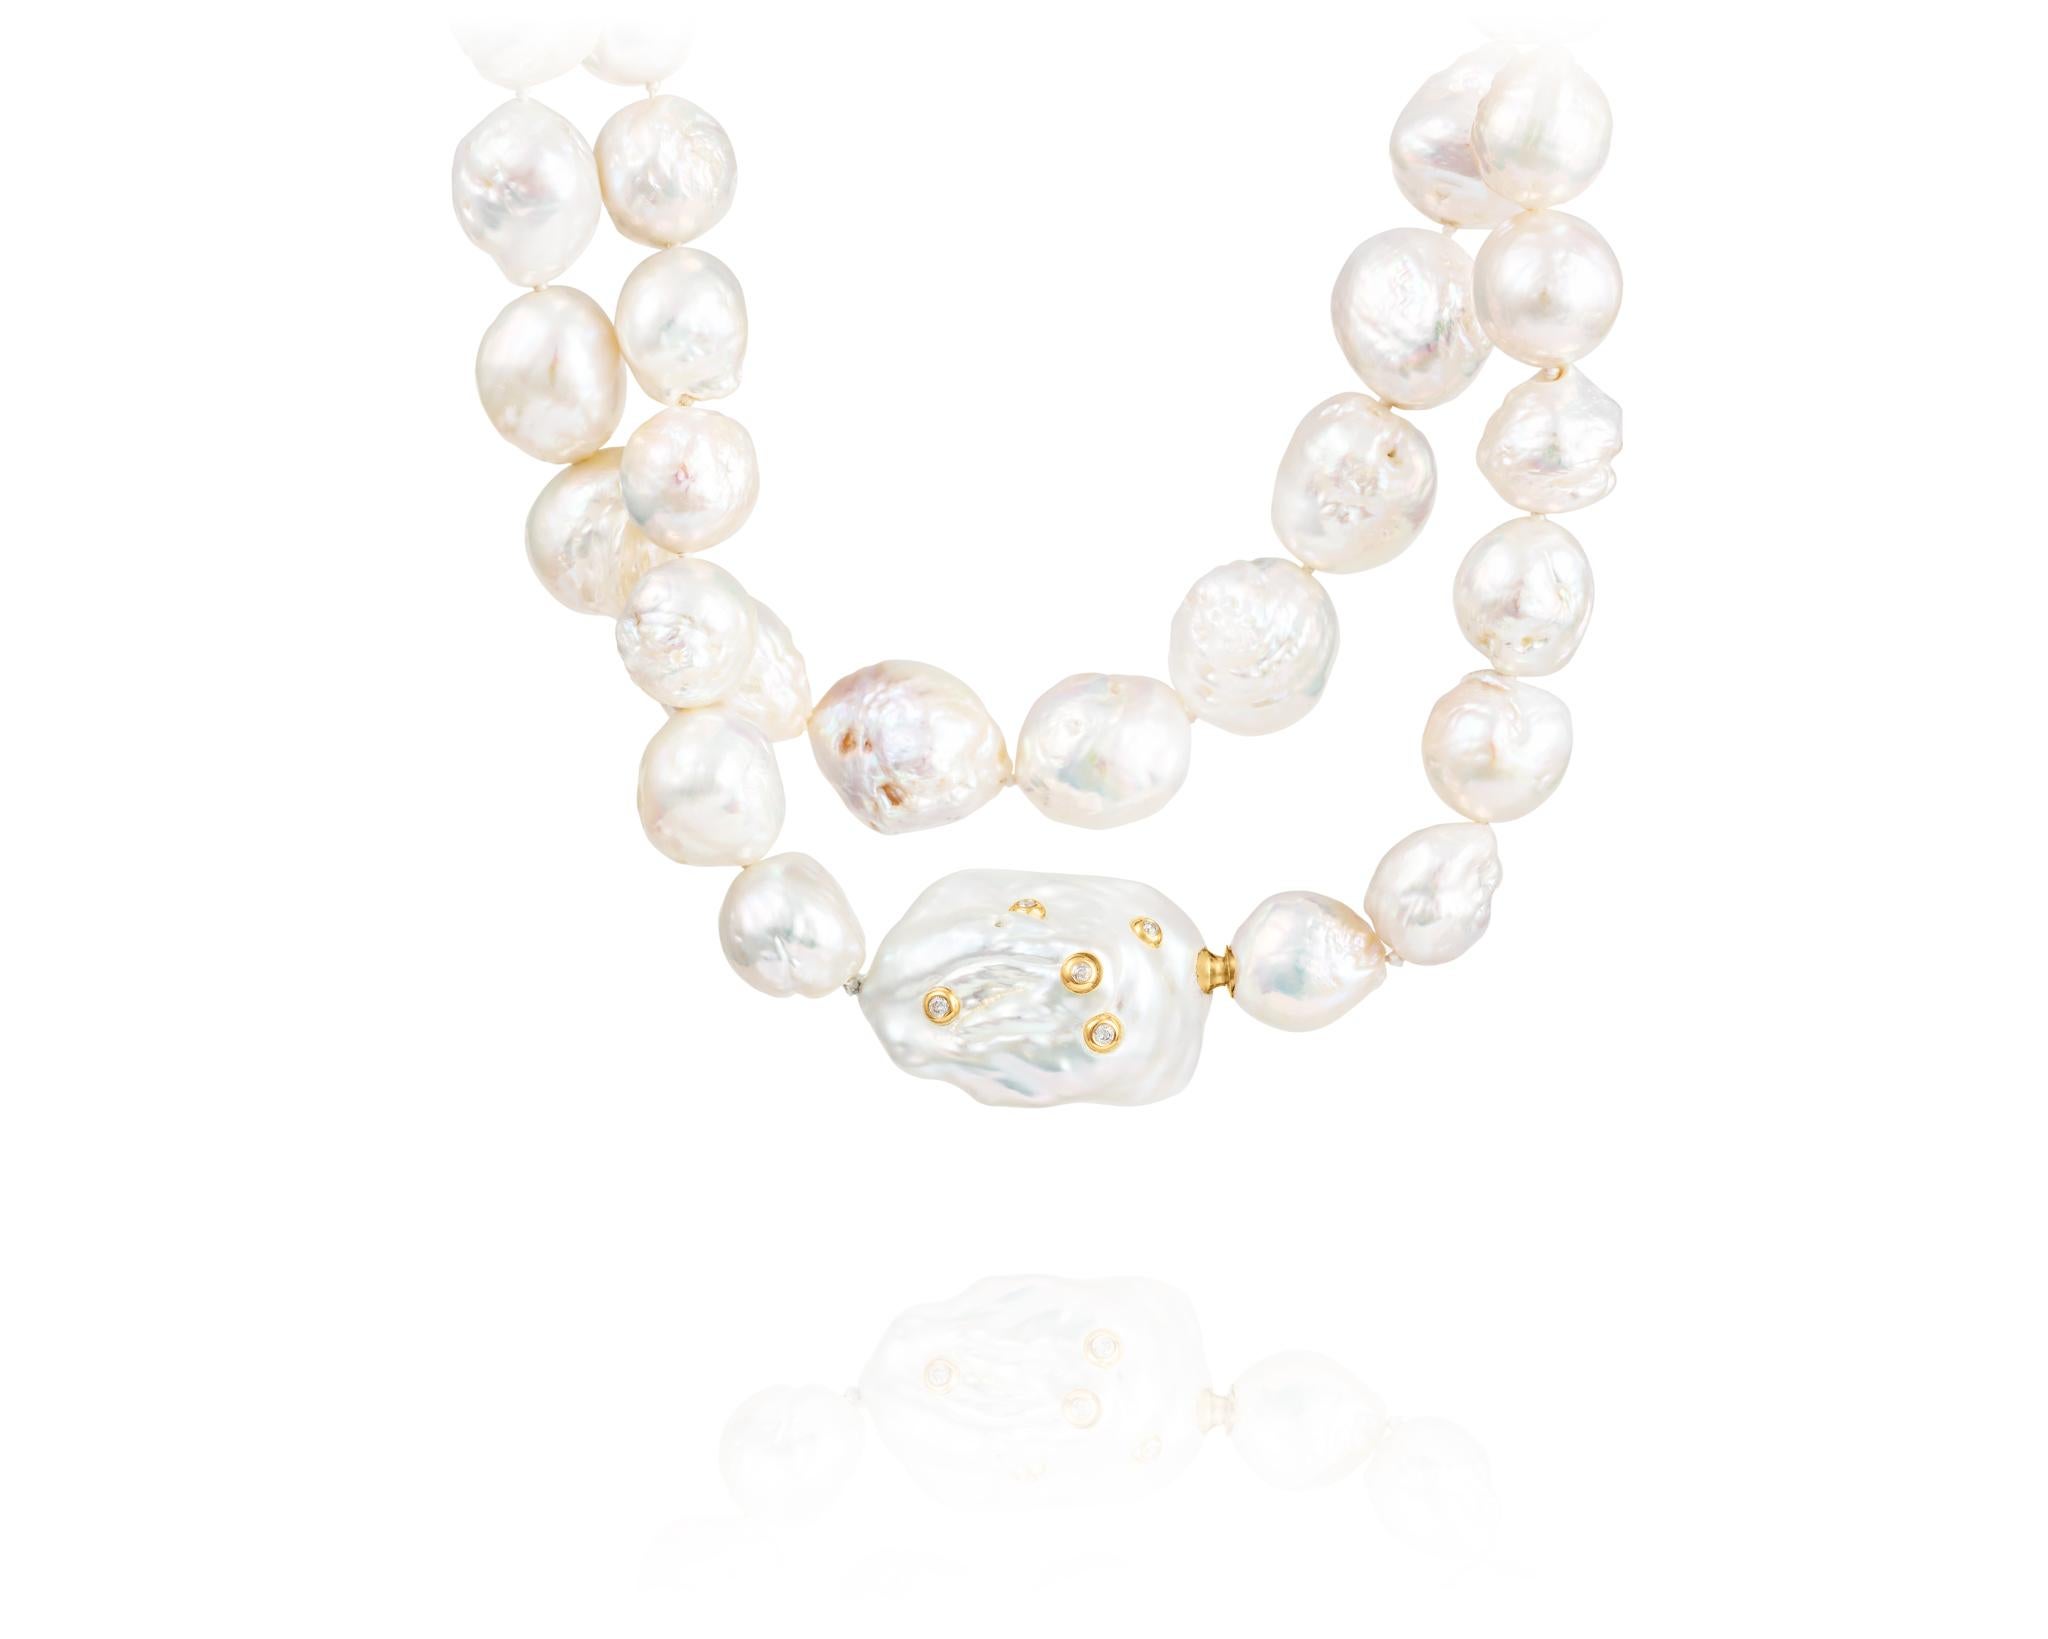 Part of the Vincent Peach Pearl Collection, the Baroque Camelot White Fireball Necklace features a weighty and luxurious 36